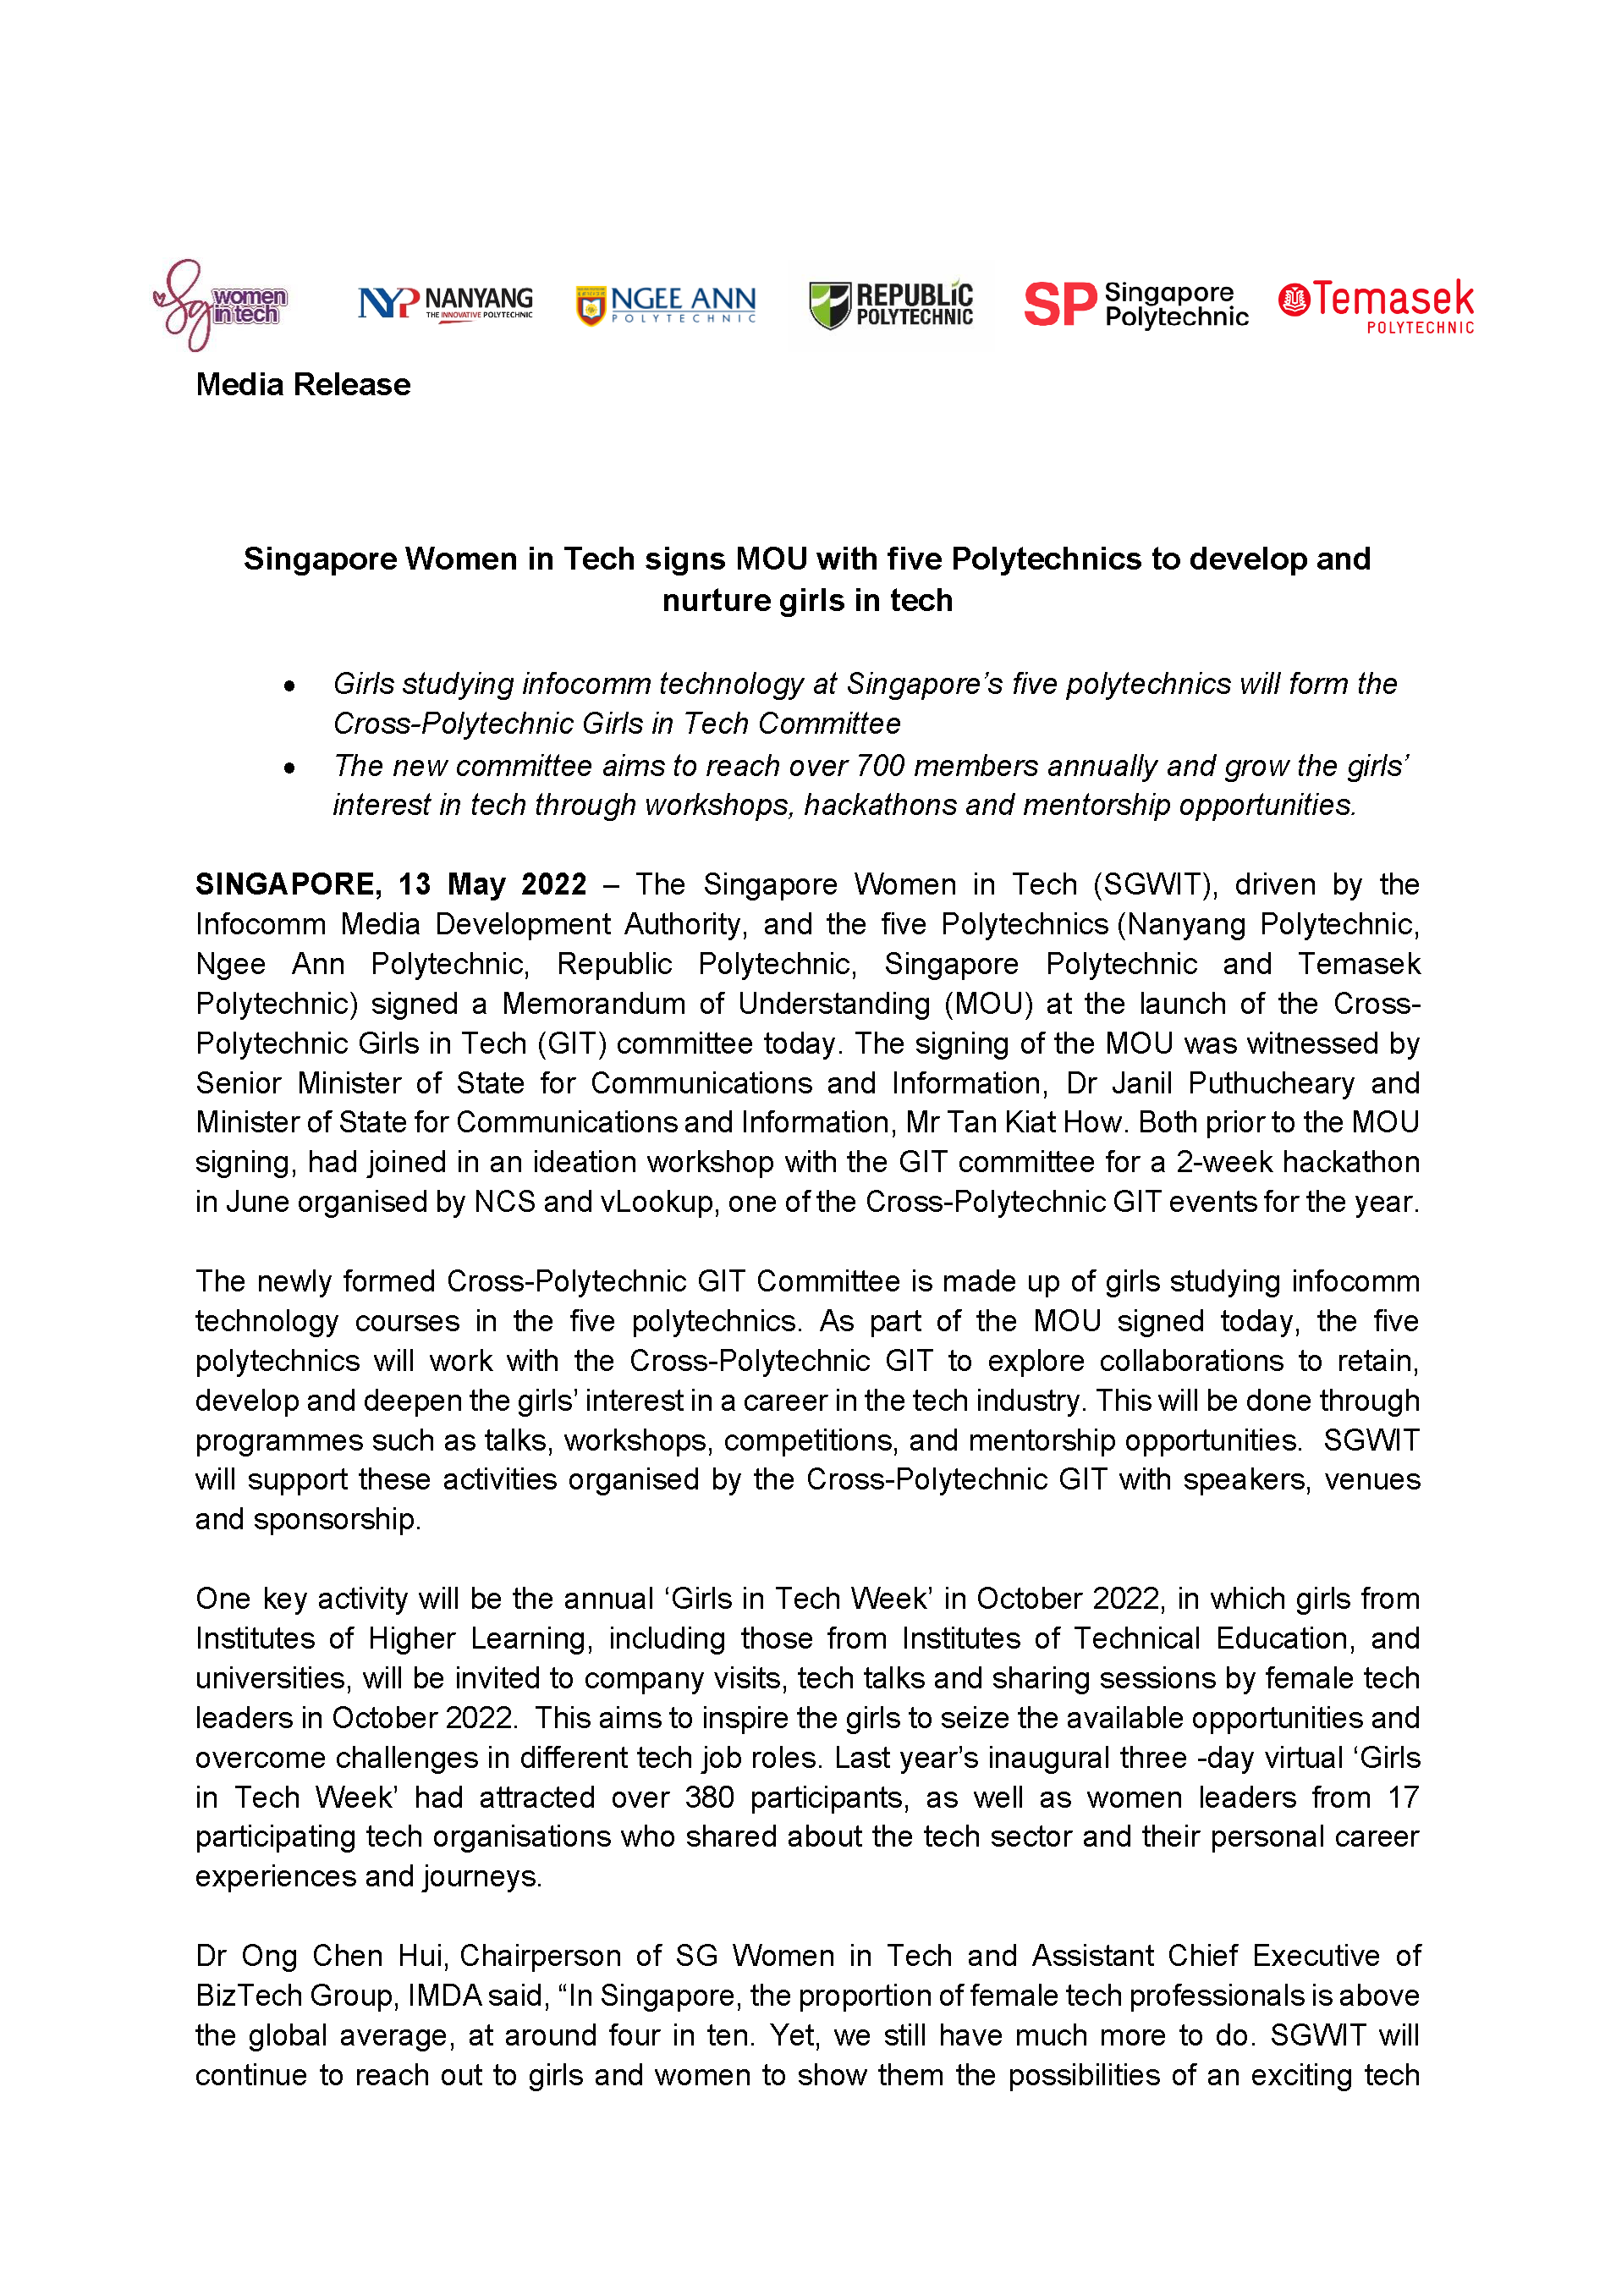 Press Release - IMDA SG WIT and GIT Collaboration__Page_1